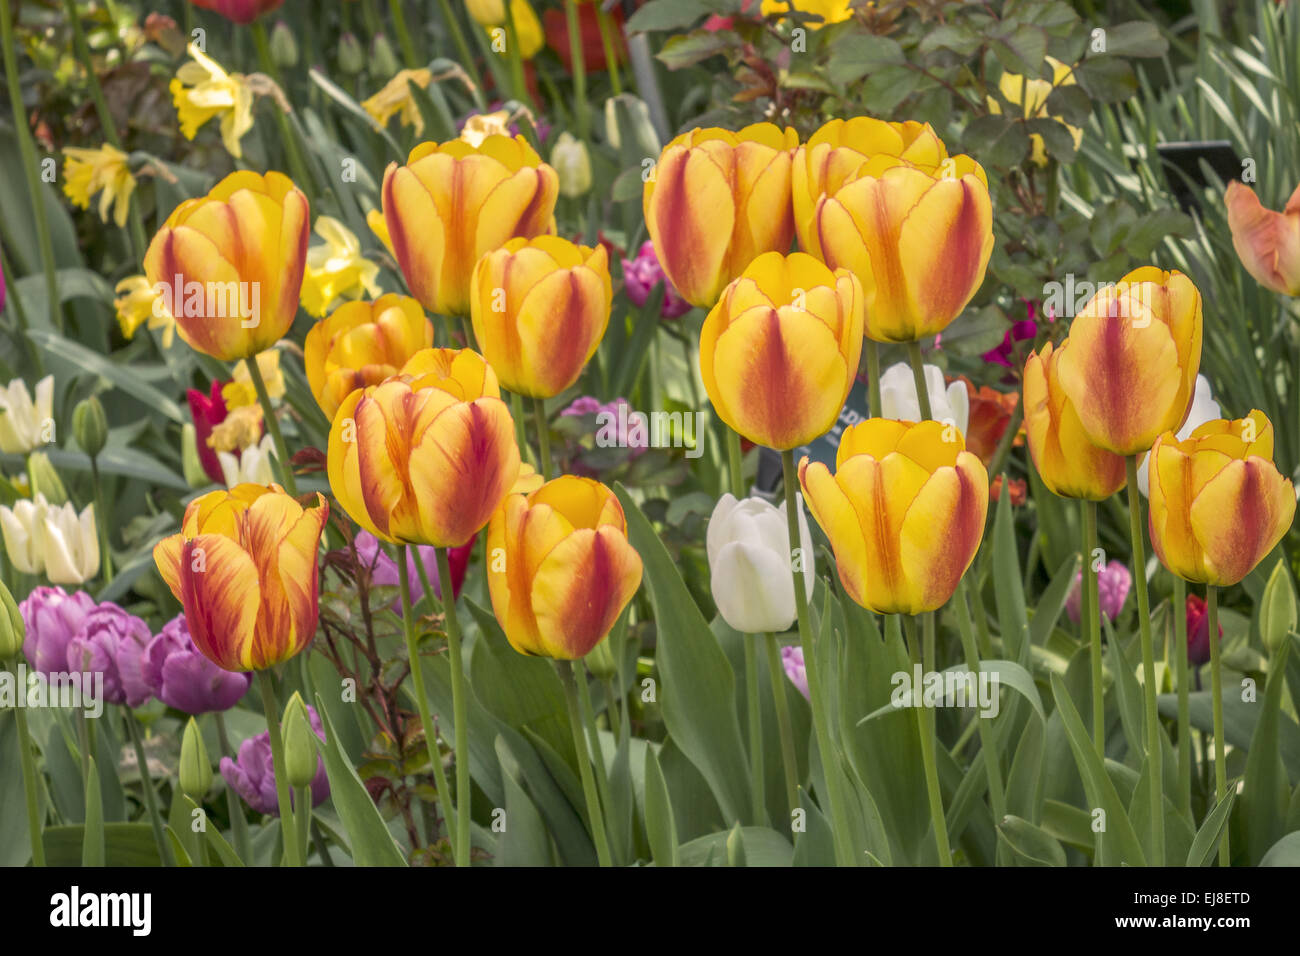 A Display Of Two Toned Tulips Berkshire UK Stock Photo